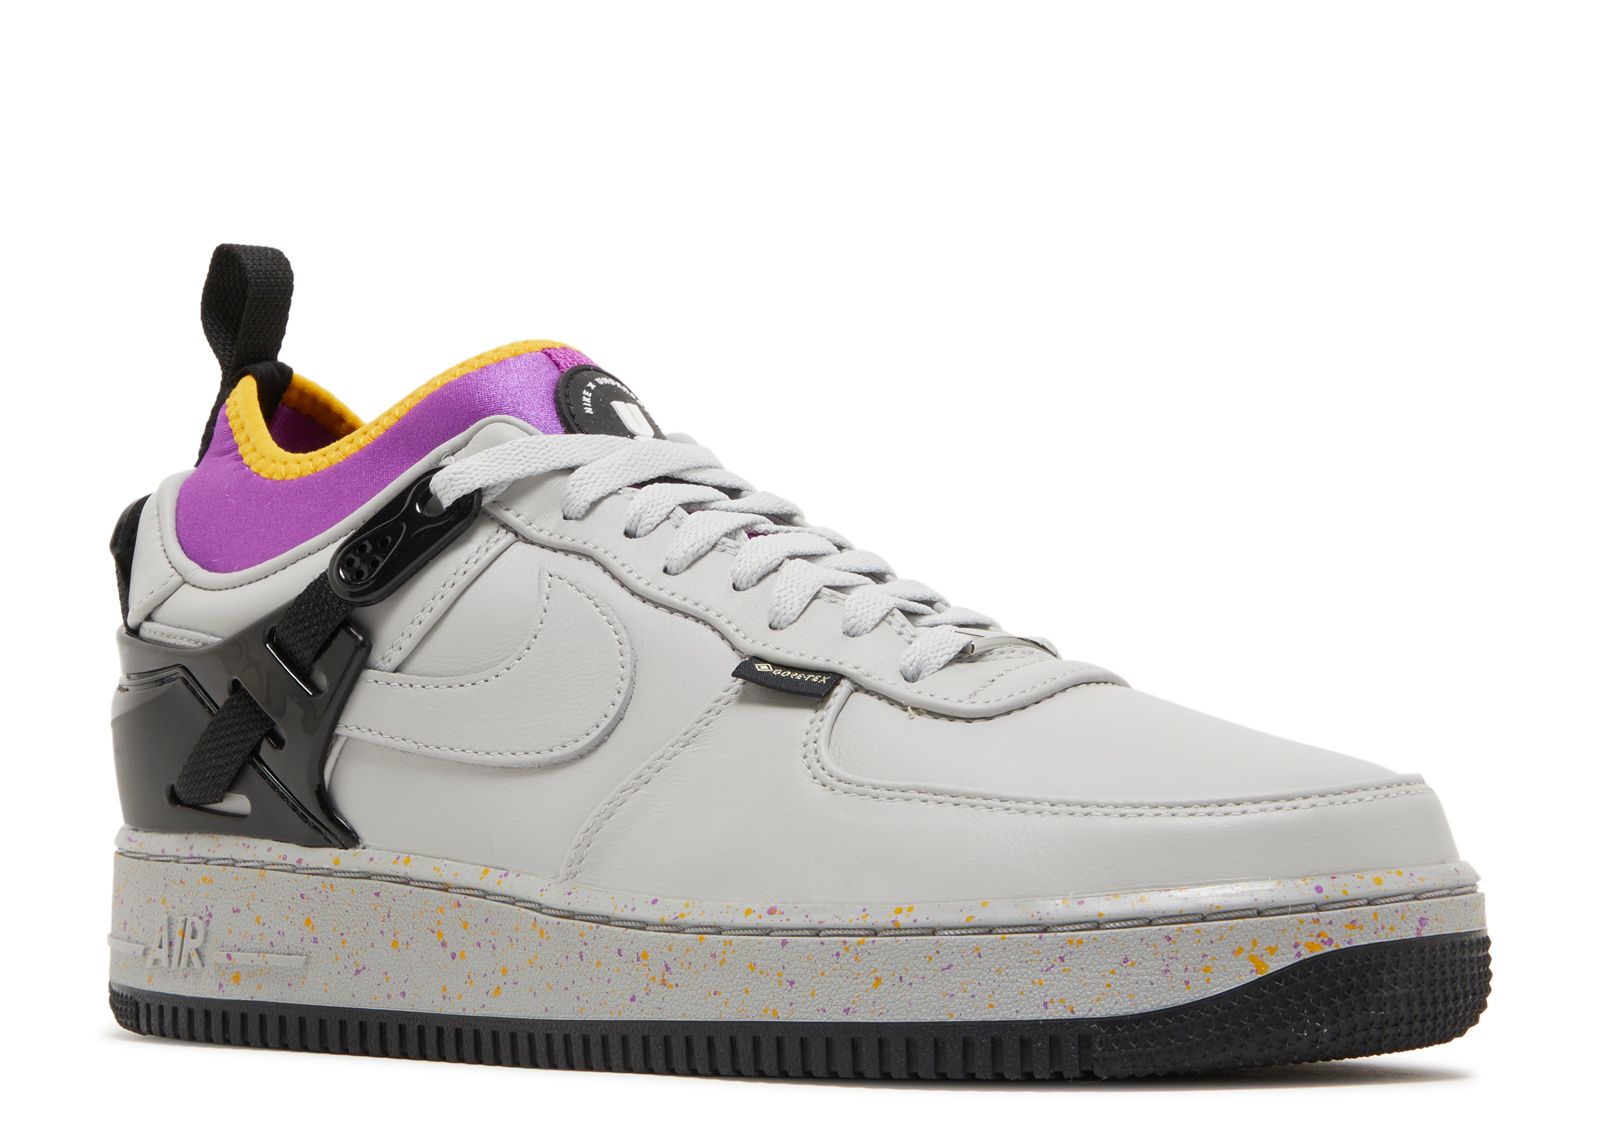 Undercover X Air Force 1 Low SP GORE TEX 'Grey Fog' - Nike